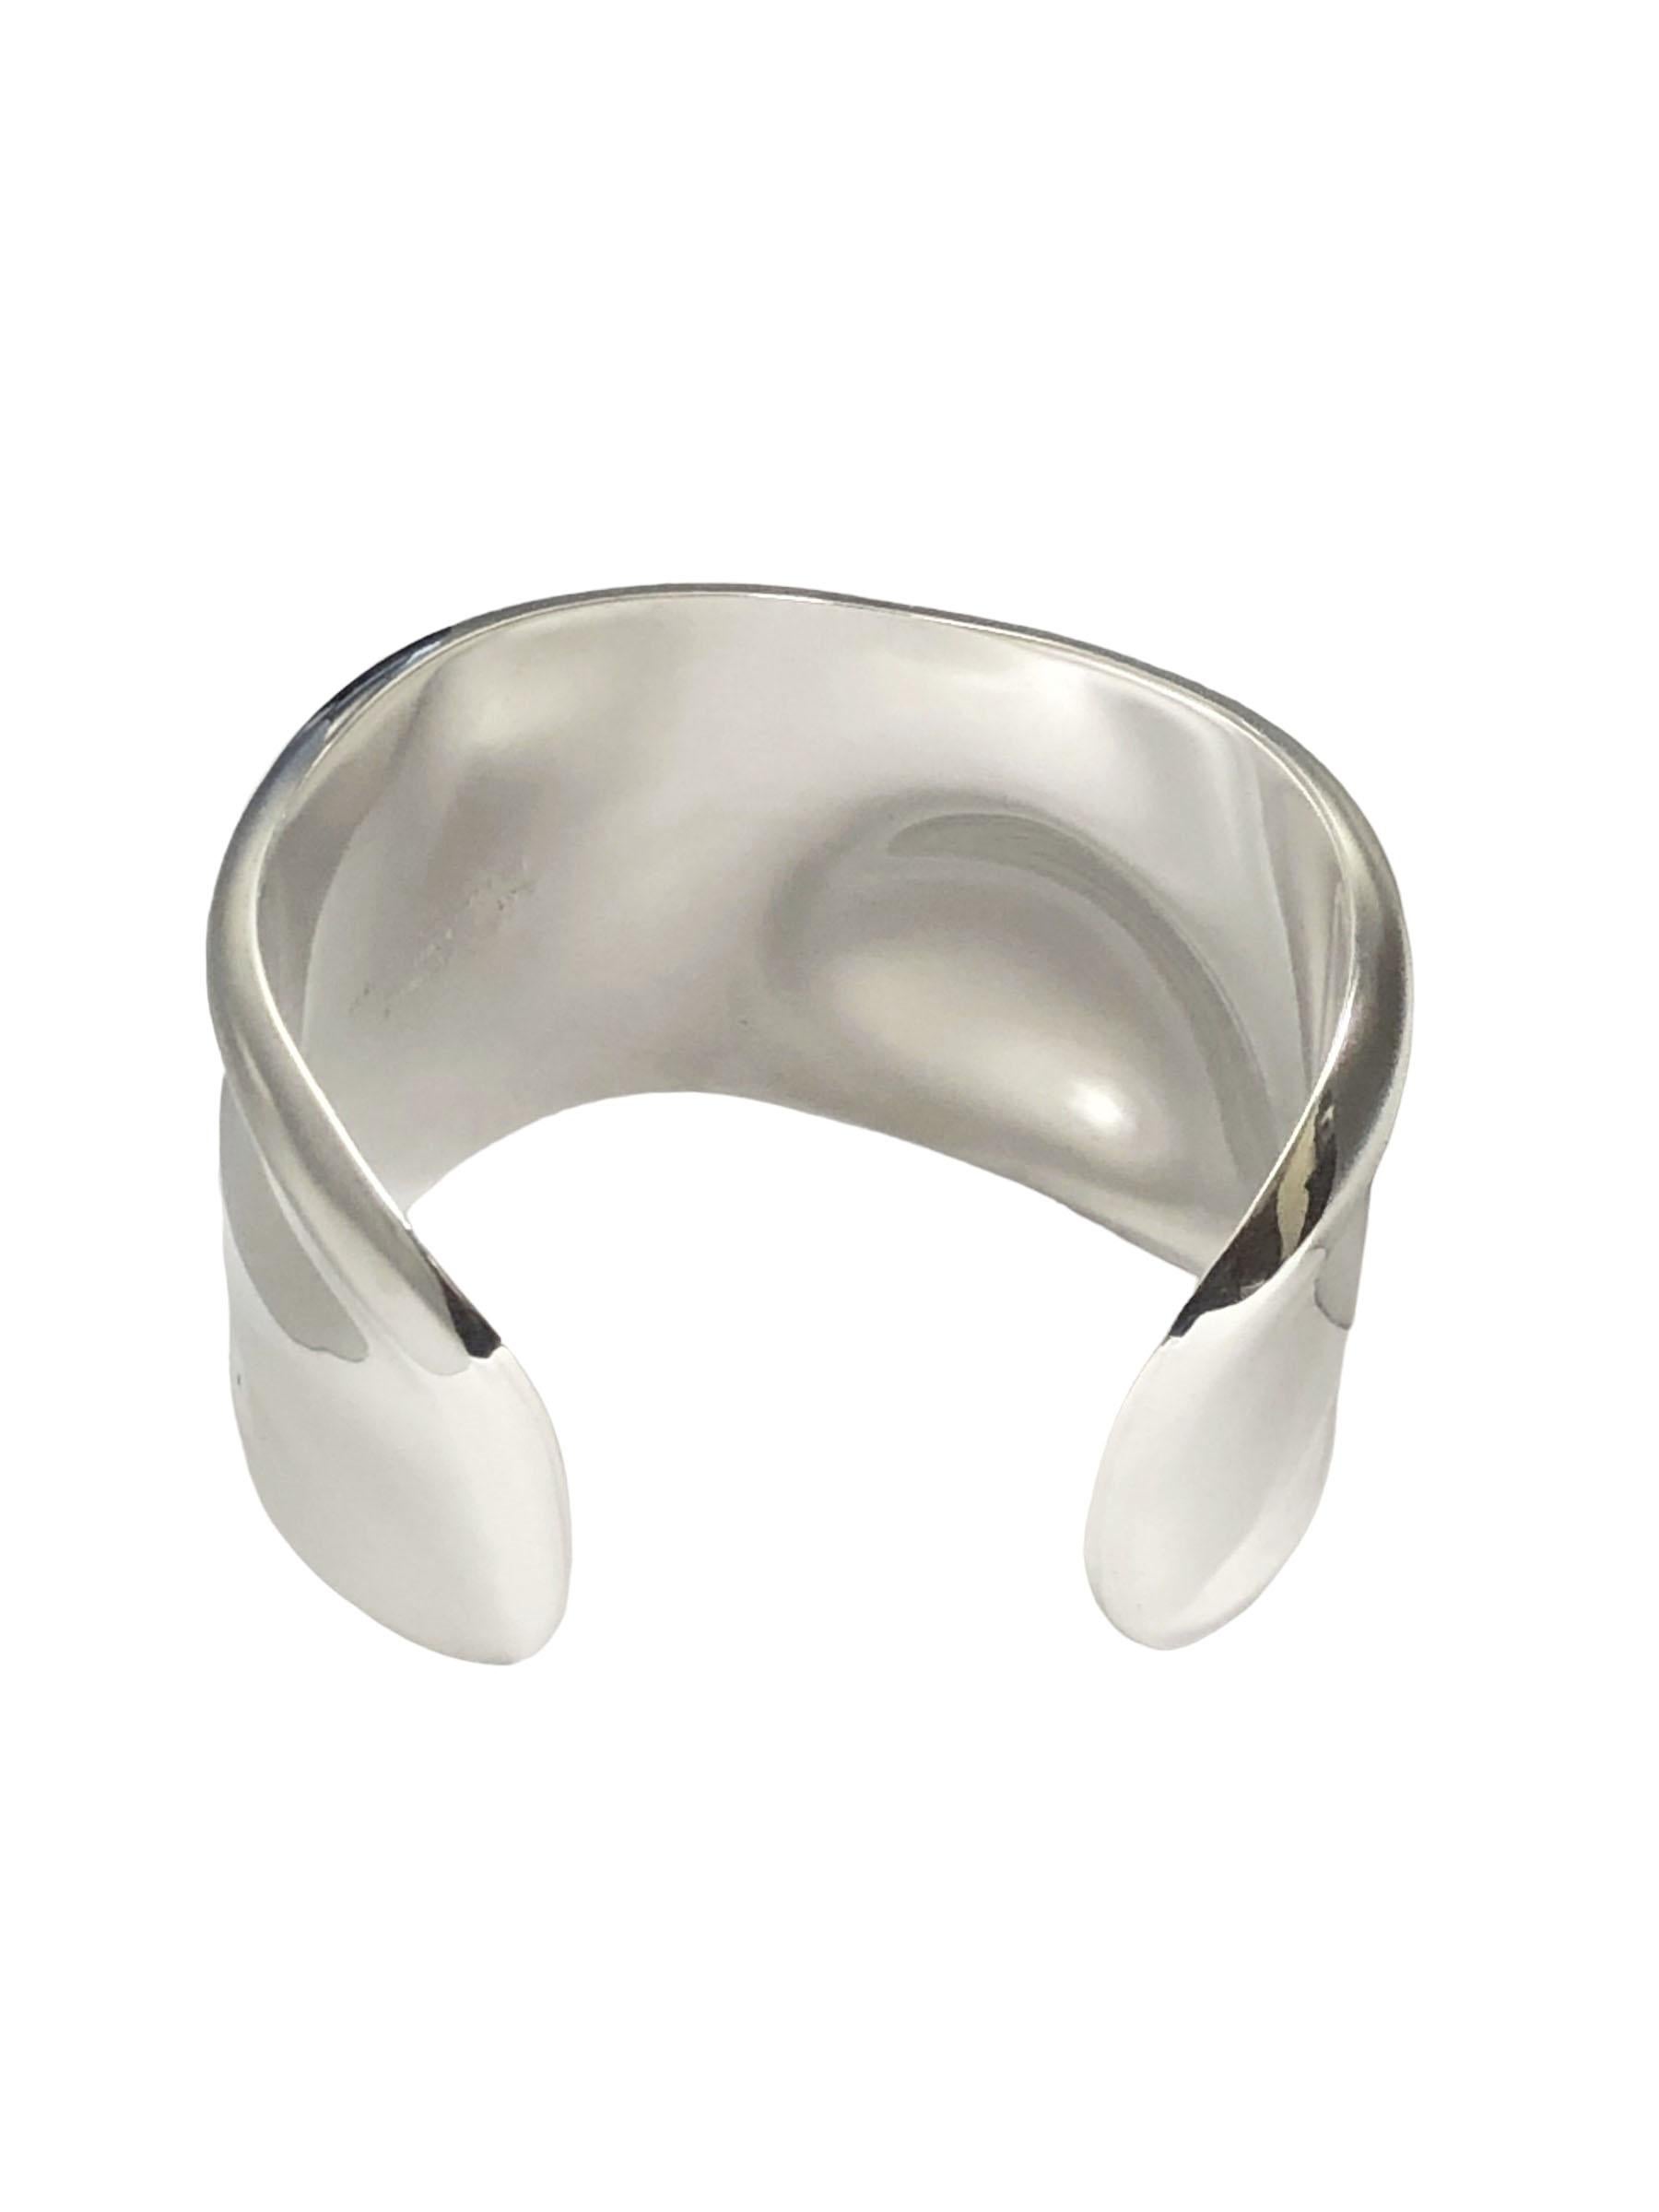 Circa 1980 Elsa Peretti for Tiffany & Co. Sterling Silver Bone Cuff Bracelet. Measuring 2 inches at its widest point, an opening of 1 inch and is plyable to be opened a bit more. Inside measurement of approximately 6 1/8 inch, This is the  large